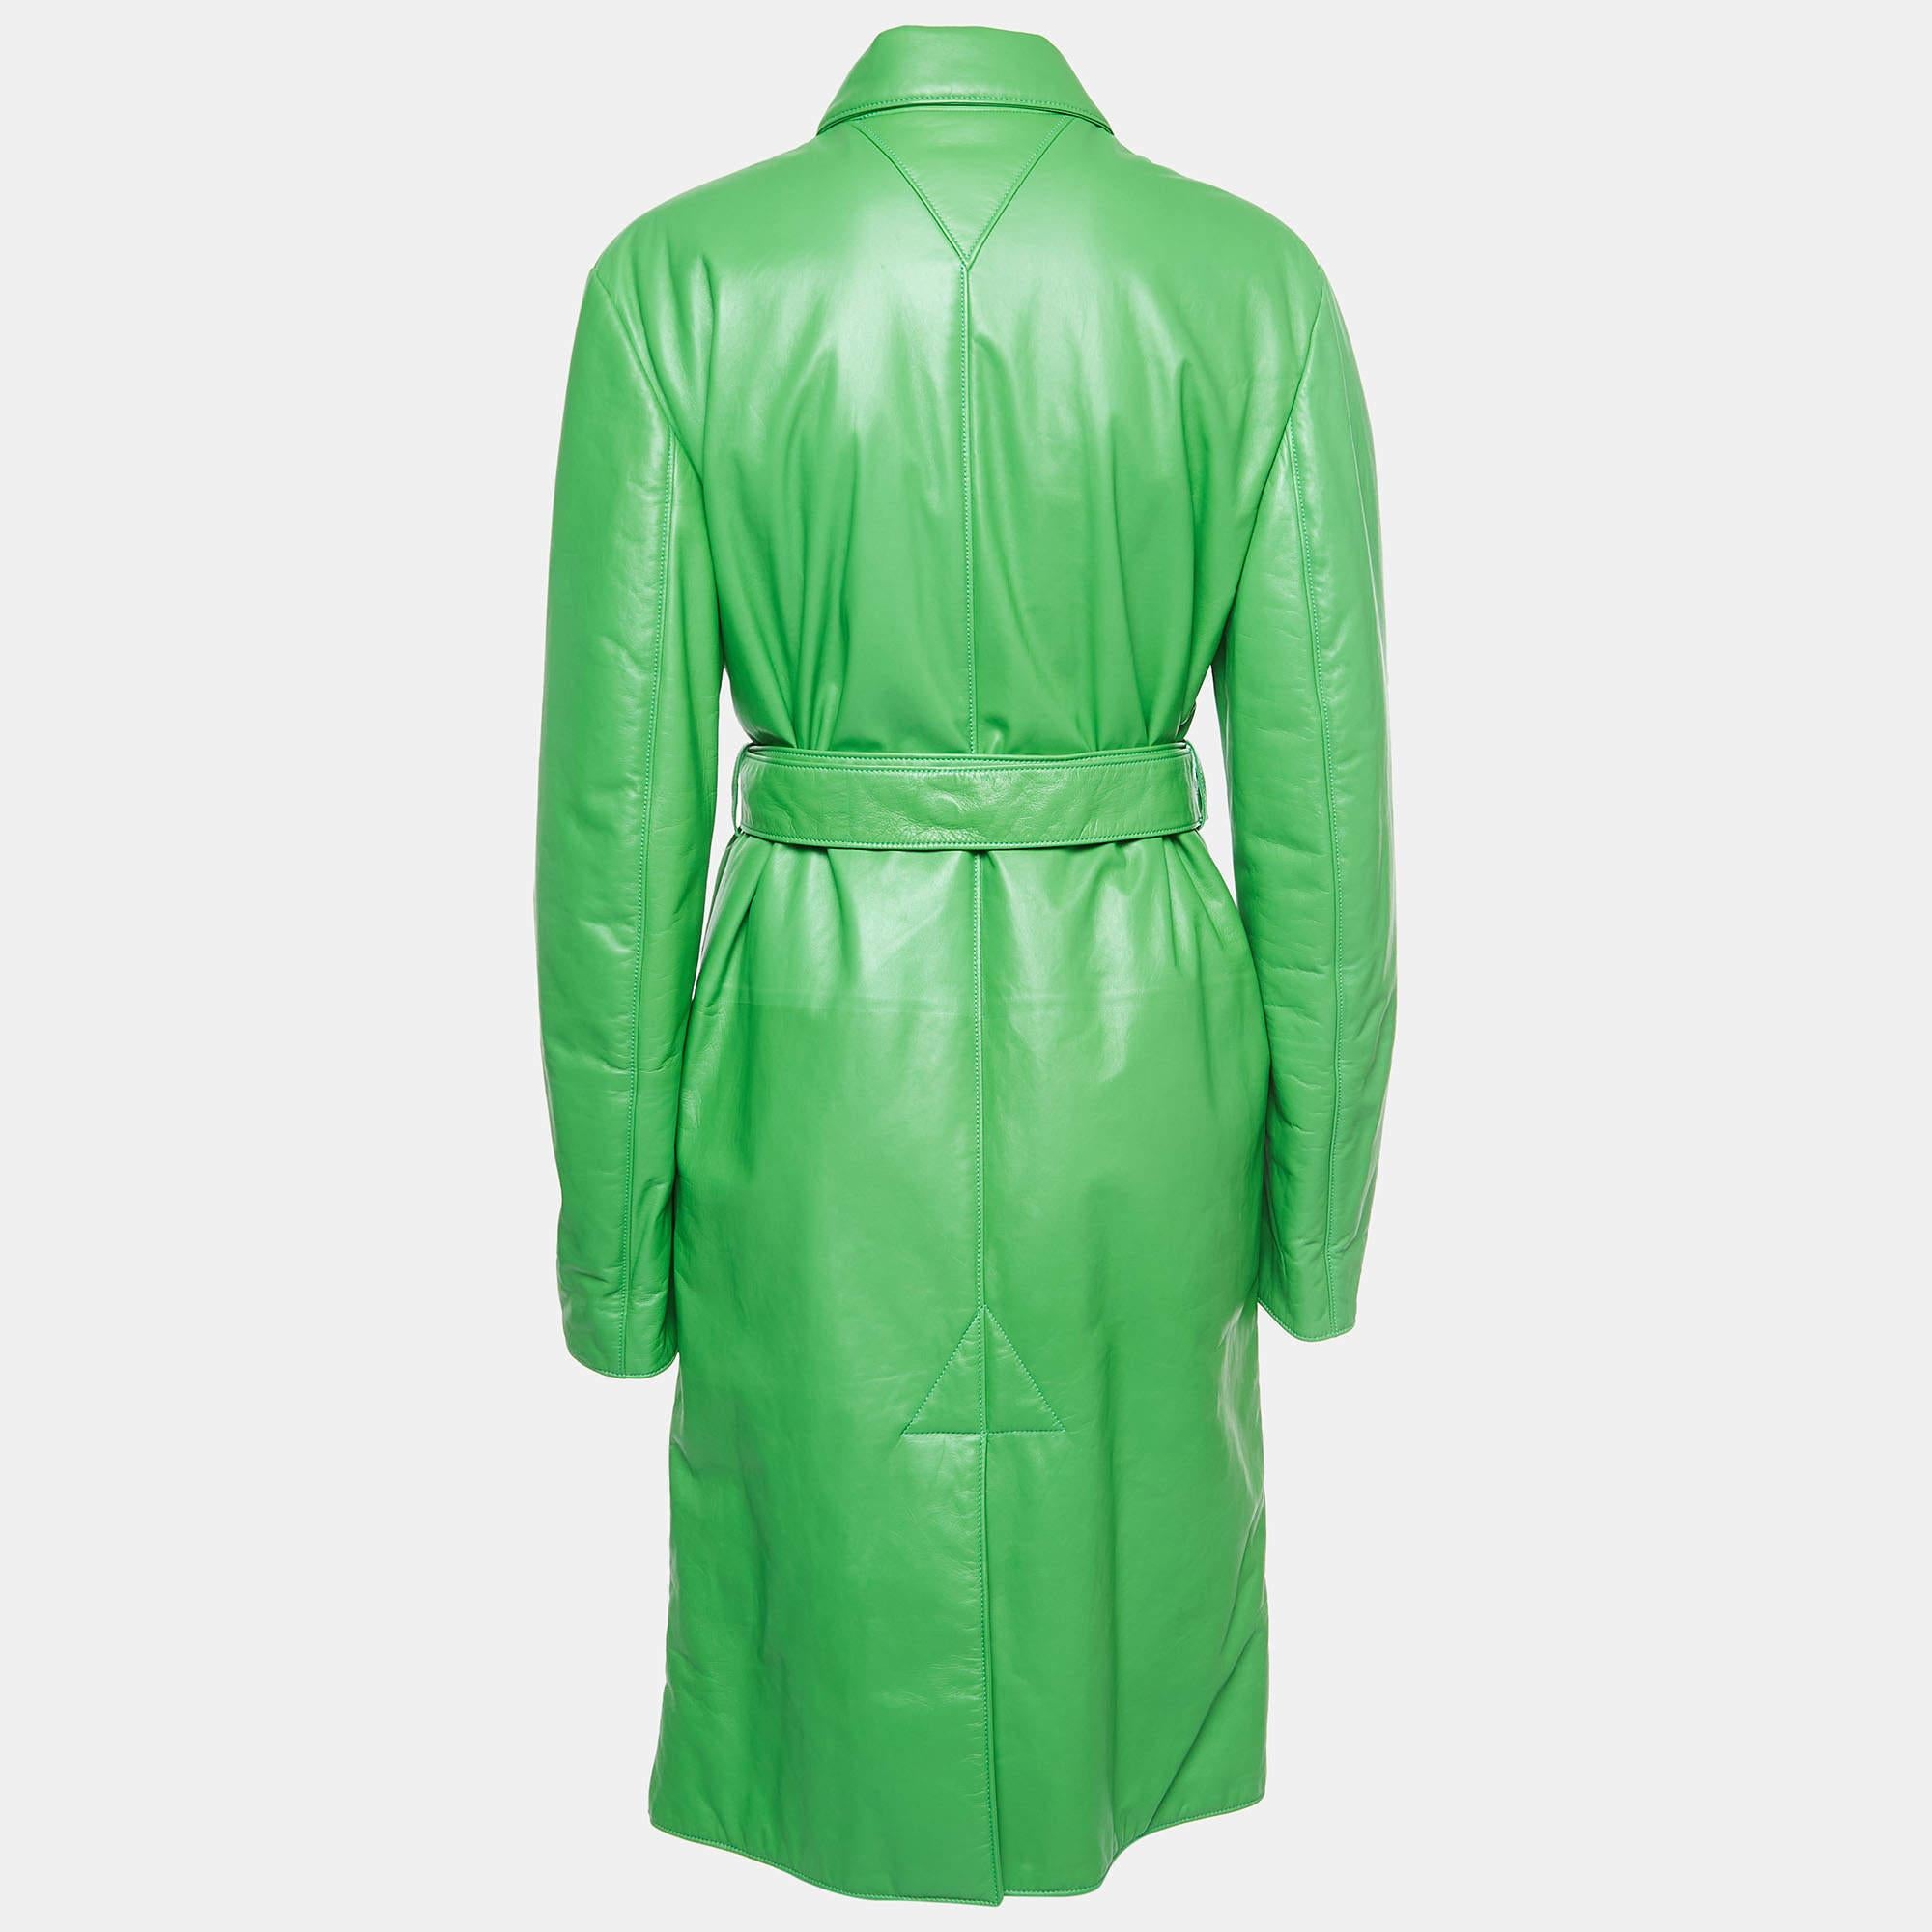 Elevate your wardrobe with the Bottega Veneta trench coat. Meticulously crafted from sumptuous lambskin, this coat boasts a sleek silhouette and a rich green hue. With its tailored fit, classic lapels, and timeless appeal, it epitomizes